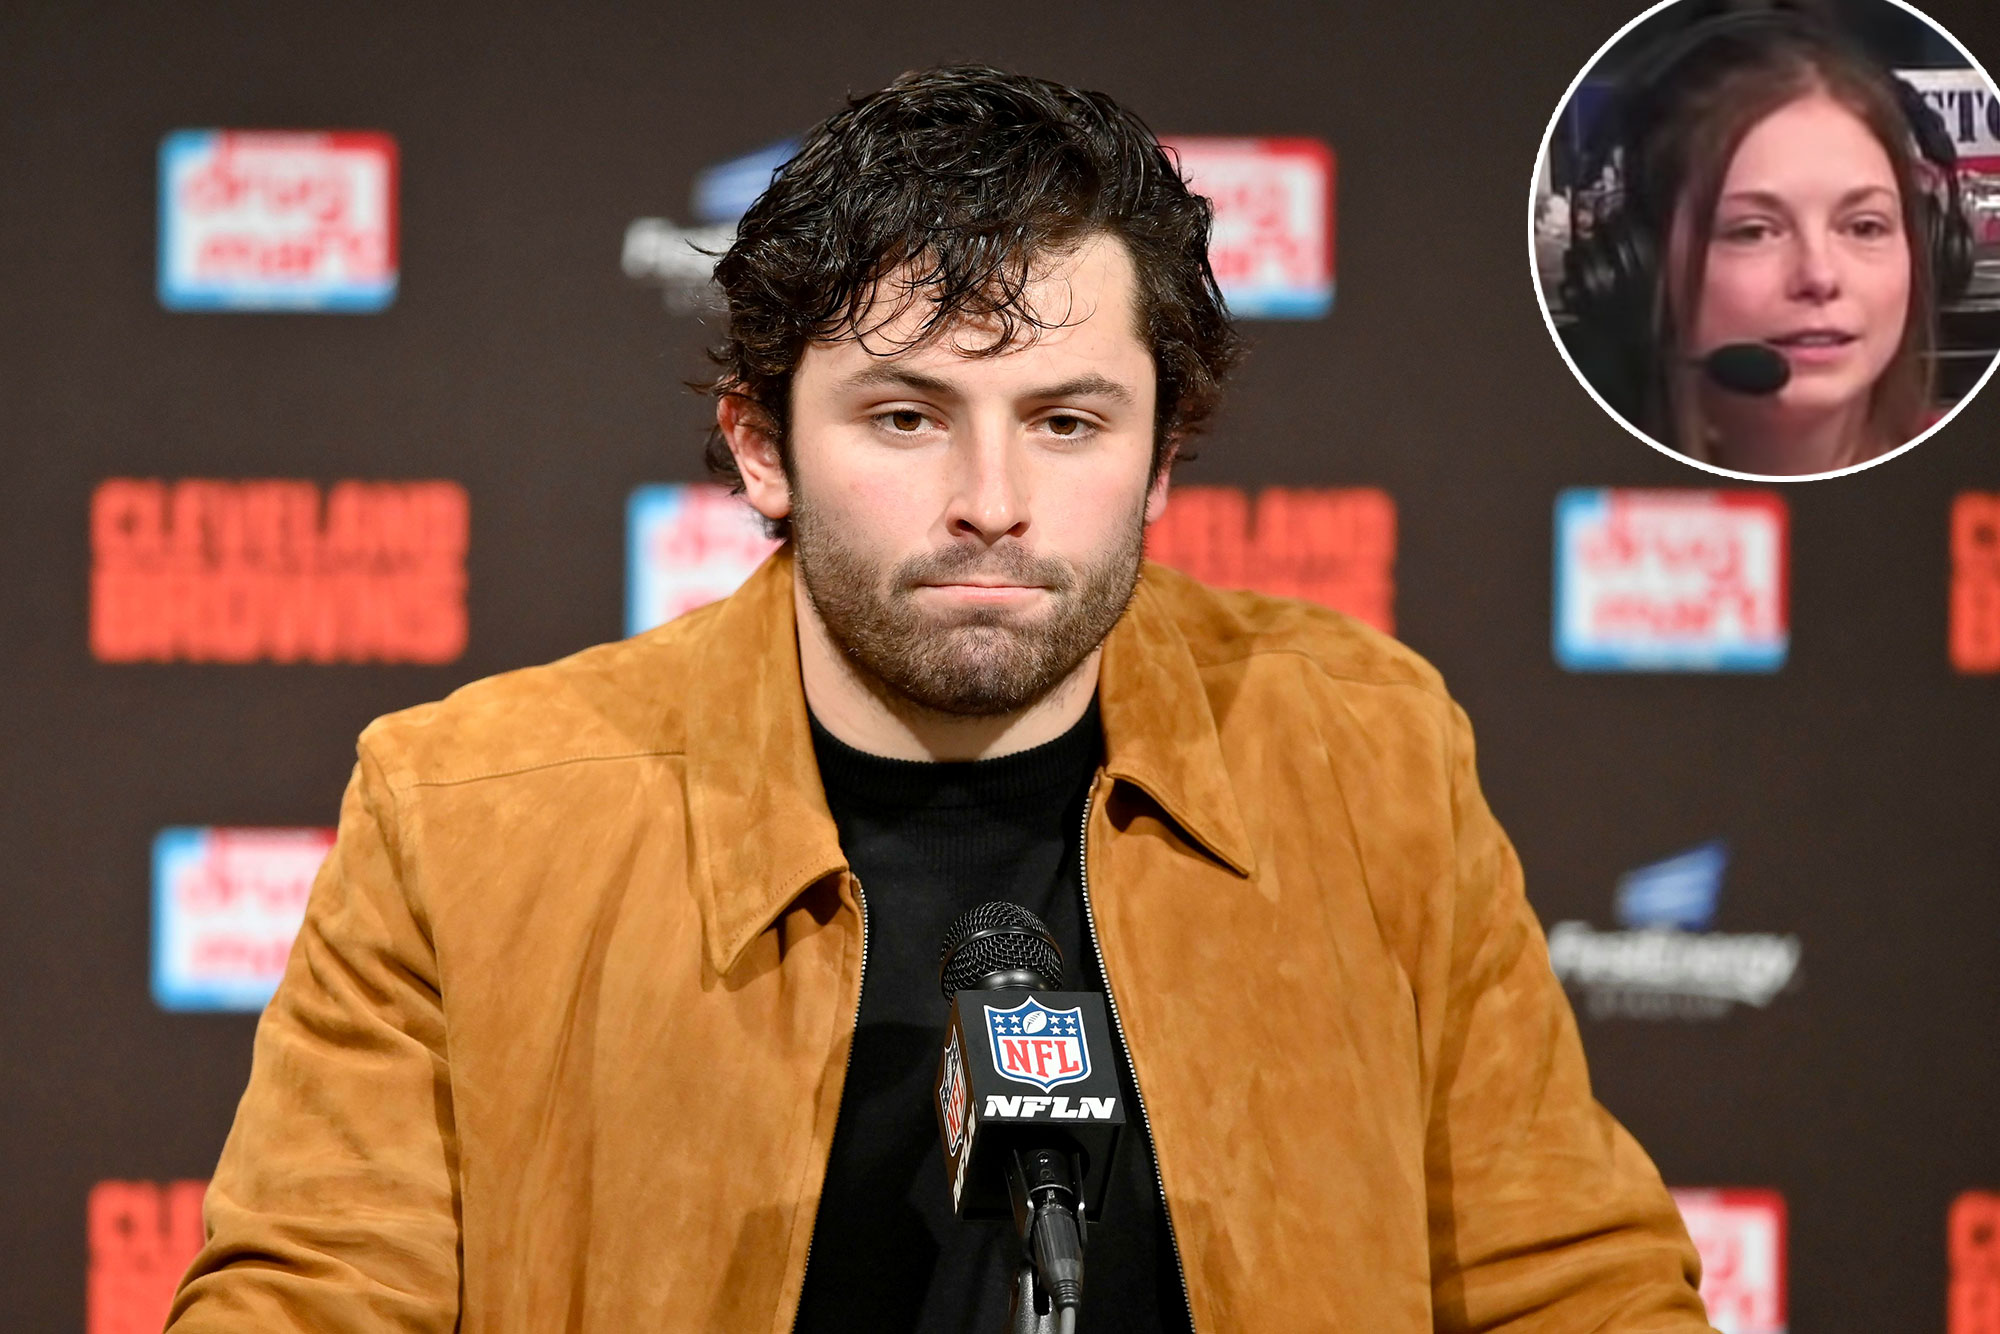 Browns Quarterback Baker Mayfield Accused of Cheating on Wife pic pic